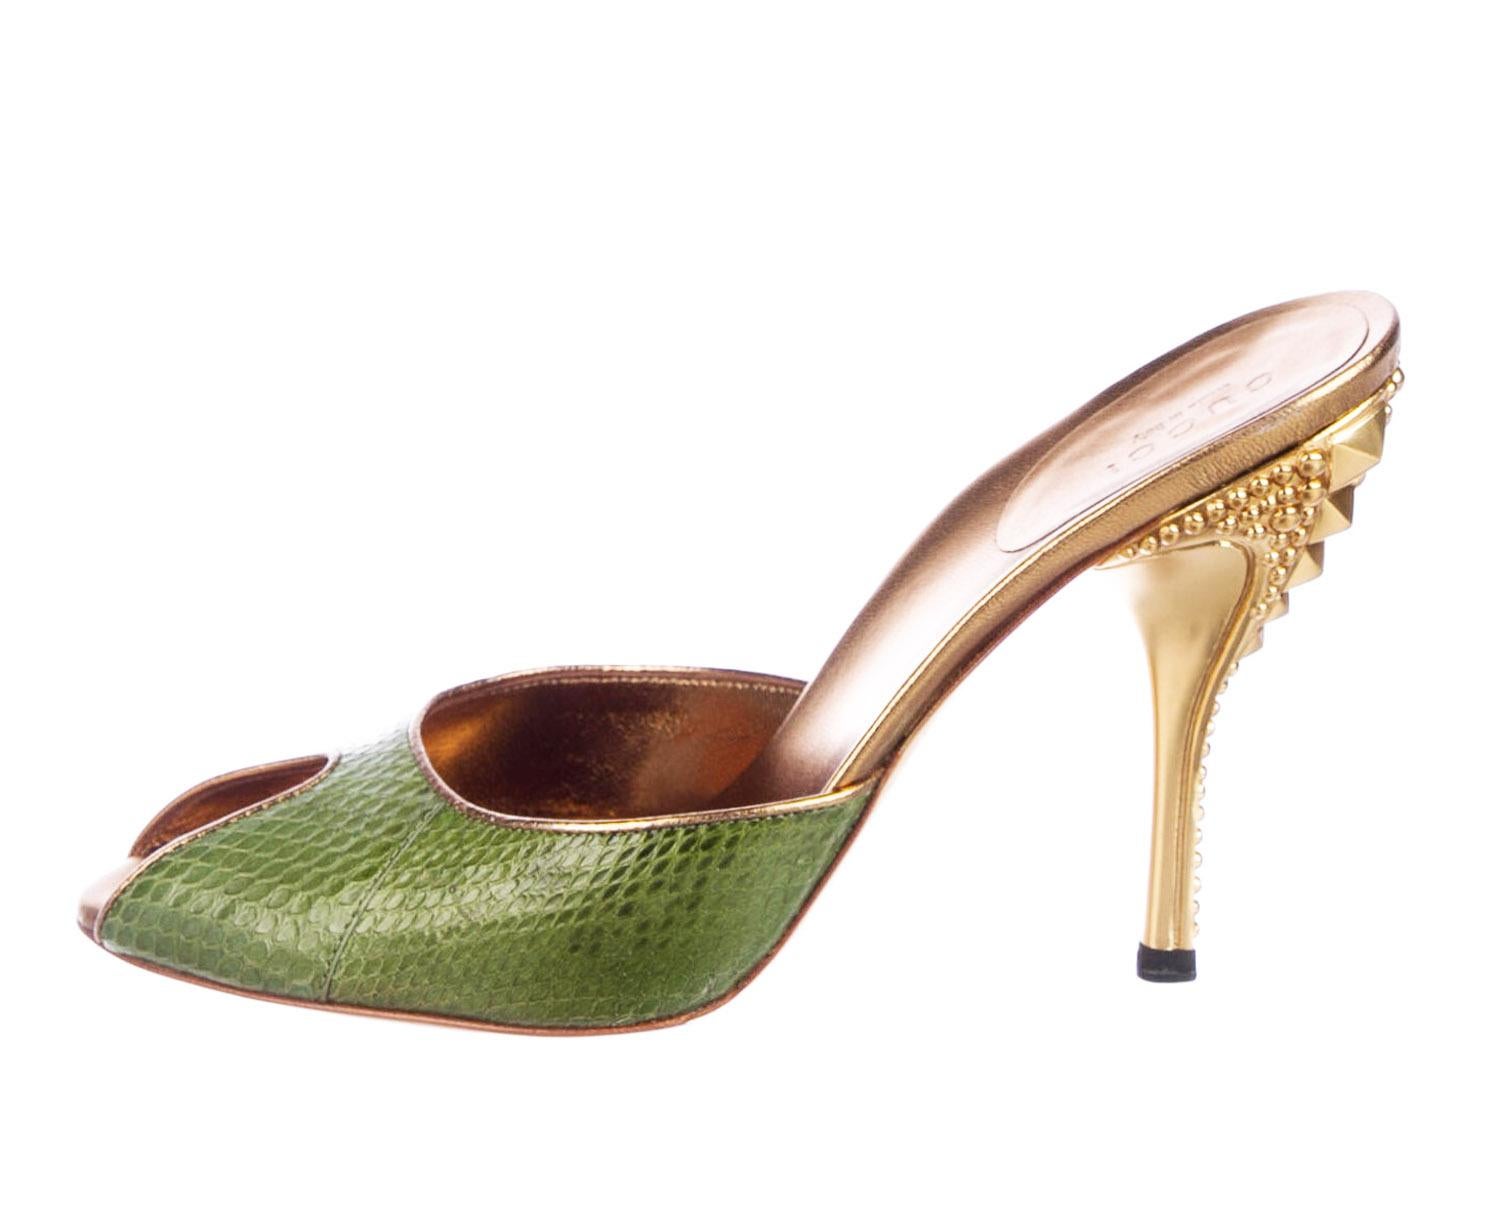 New Tom Ford for Gucci Runway Green / Gold Studded High Heels Mules
Designer size 7 B - Italian size 37 B
Designer Color - Leaf Green
Tom Ford's 